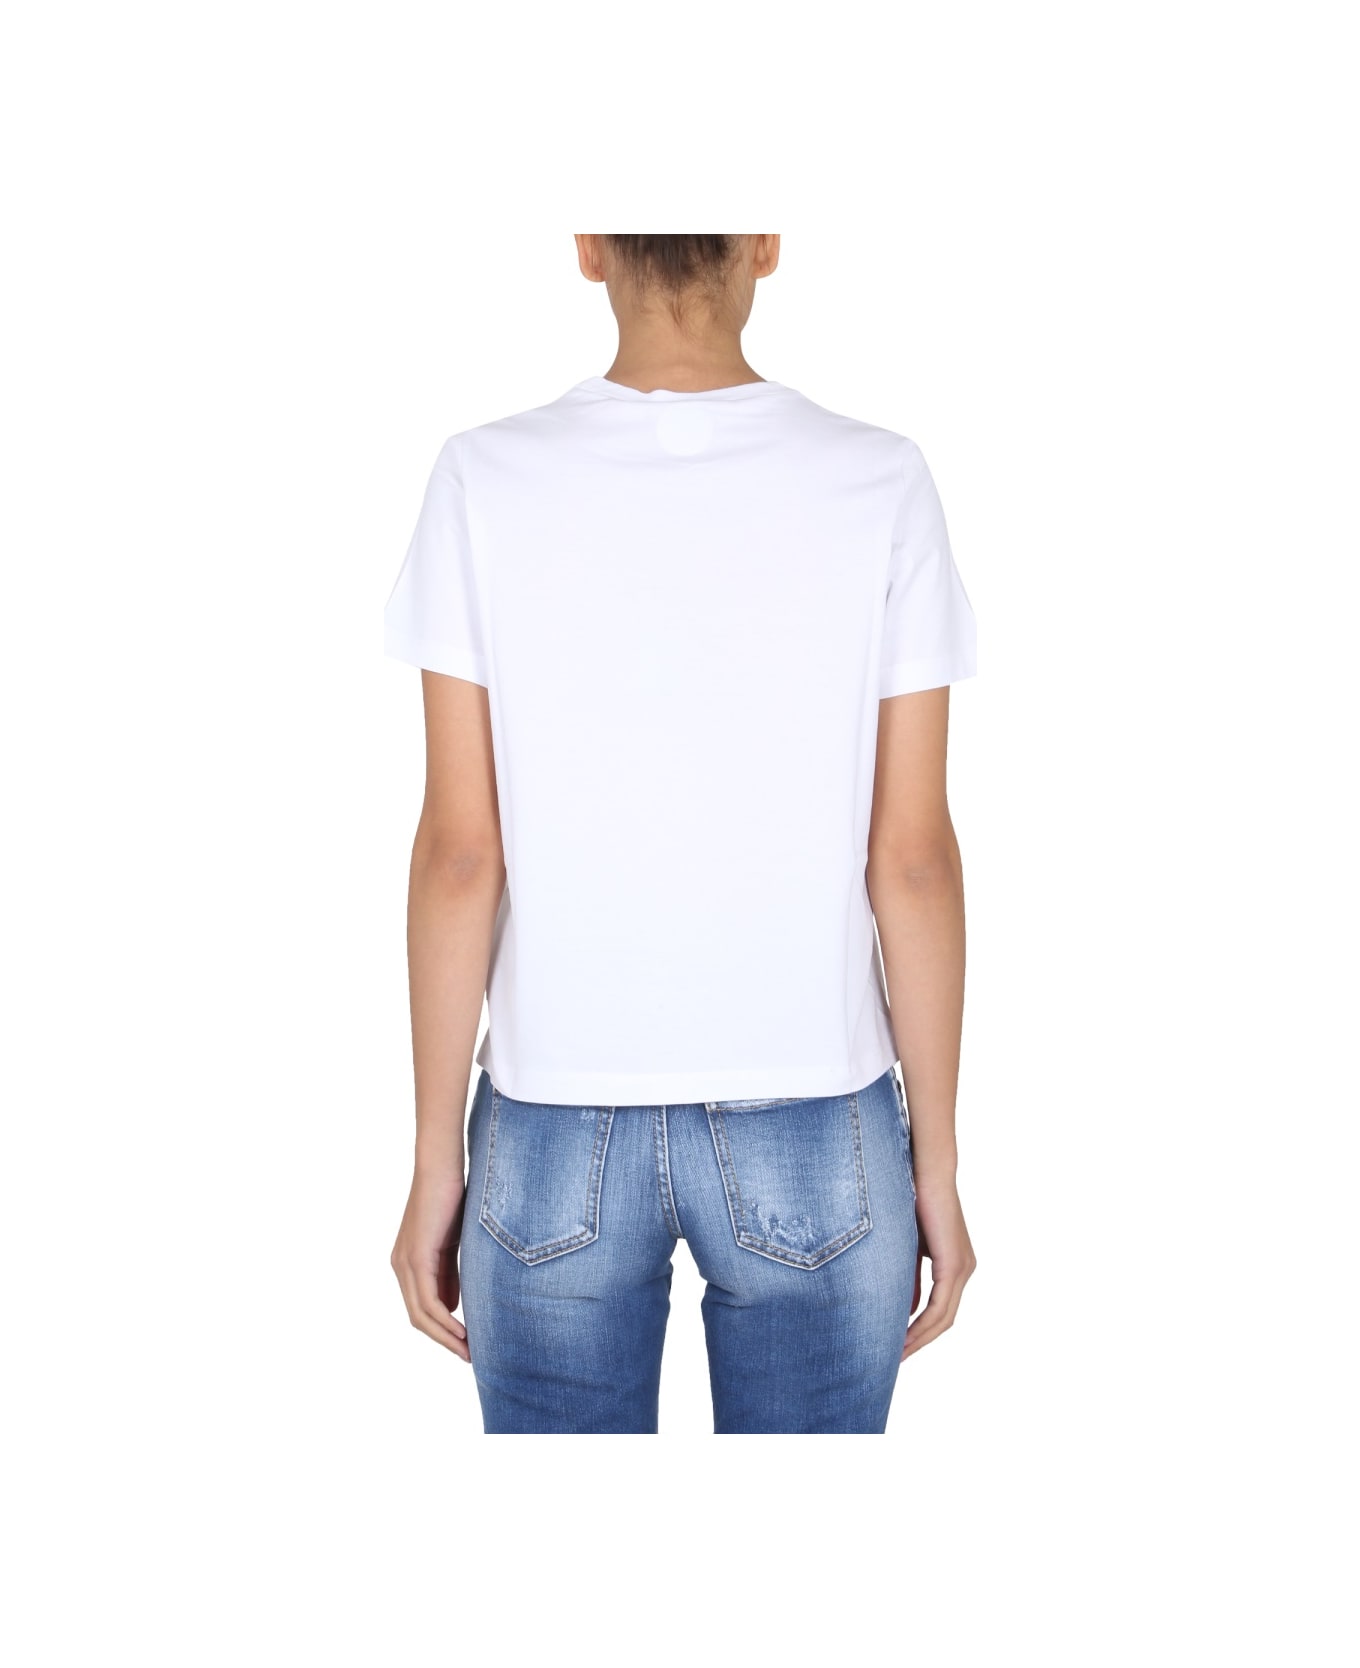 Dsquared2 "d2 Love Toy" T-shirt - WHITE Tシャツ